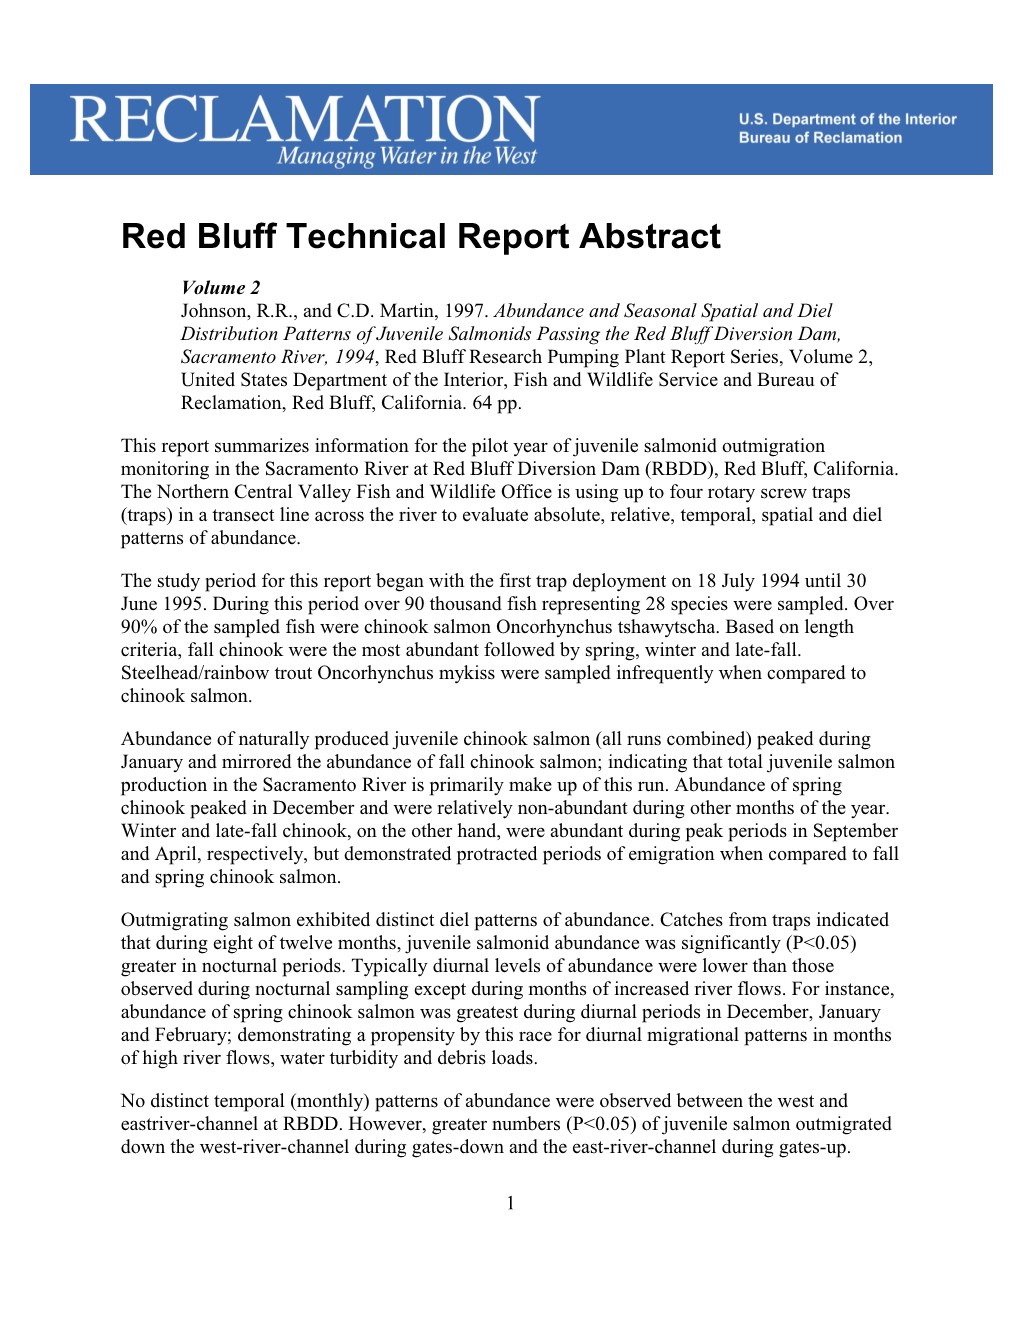 Red Bluff Technical Report Abstract, Volume 2